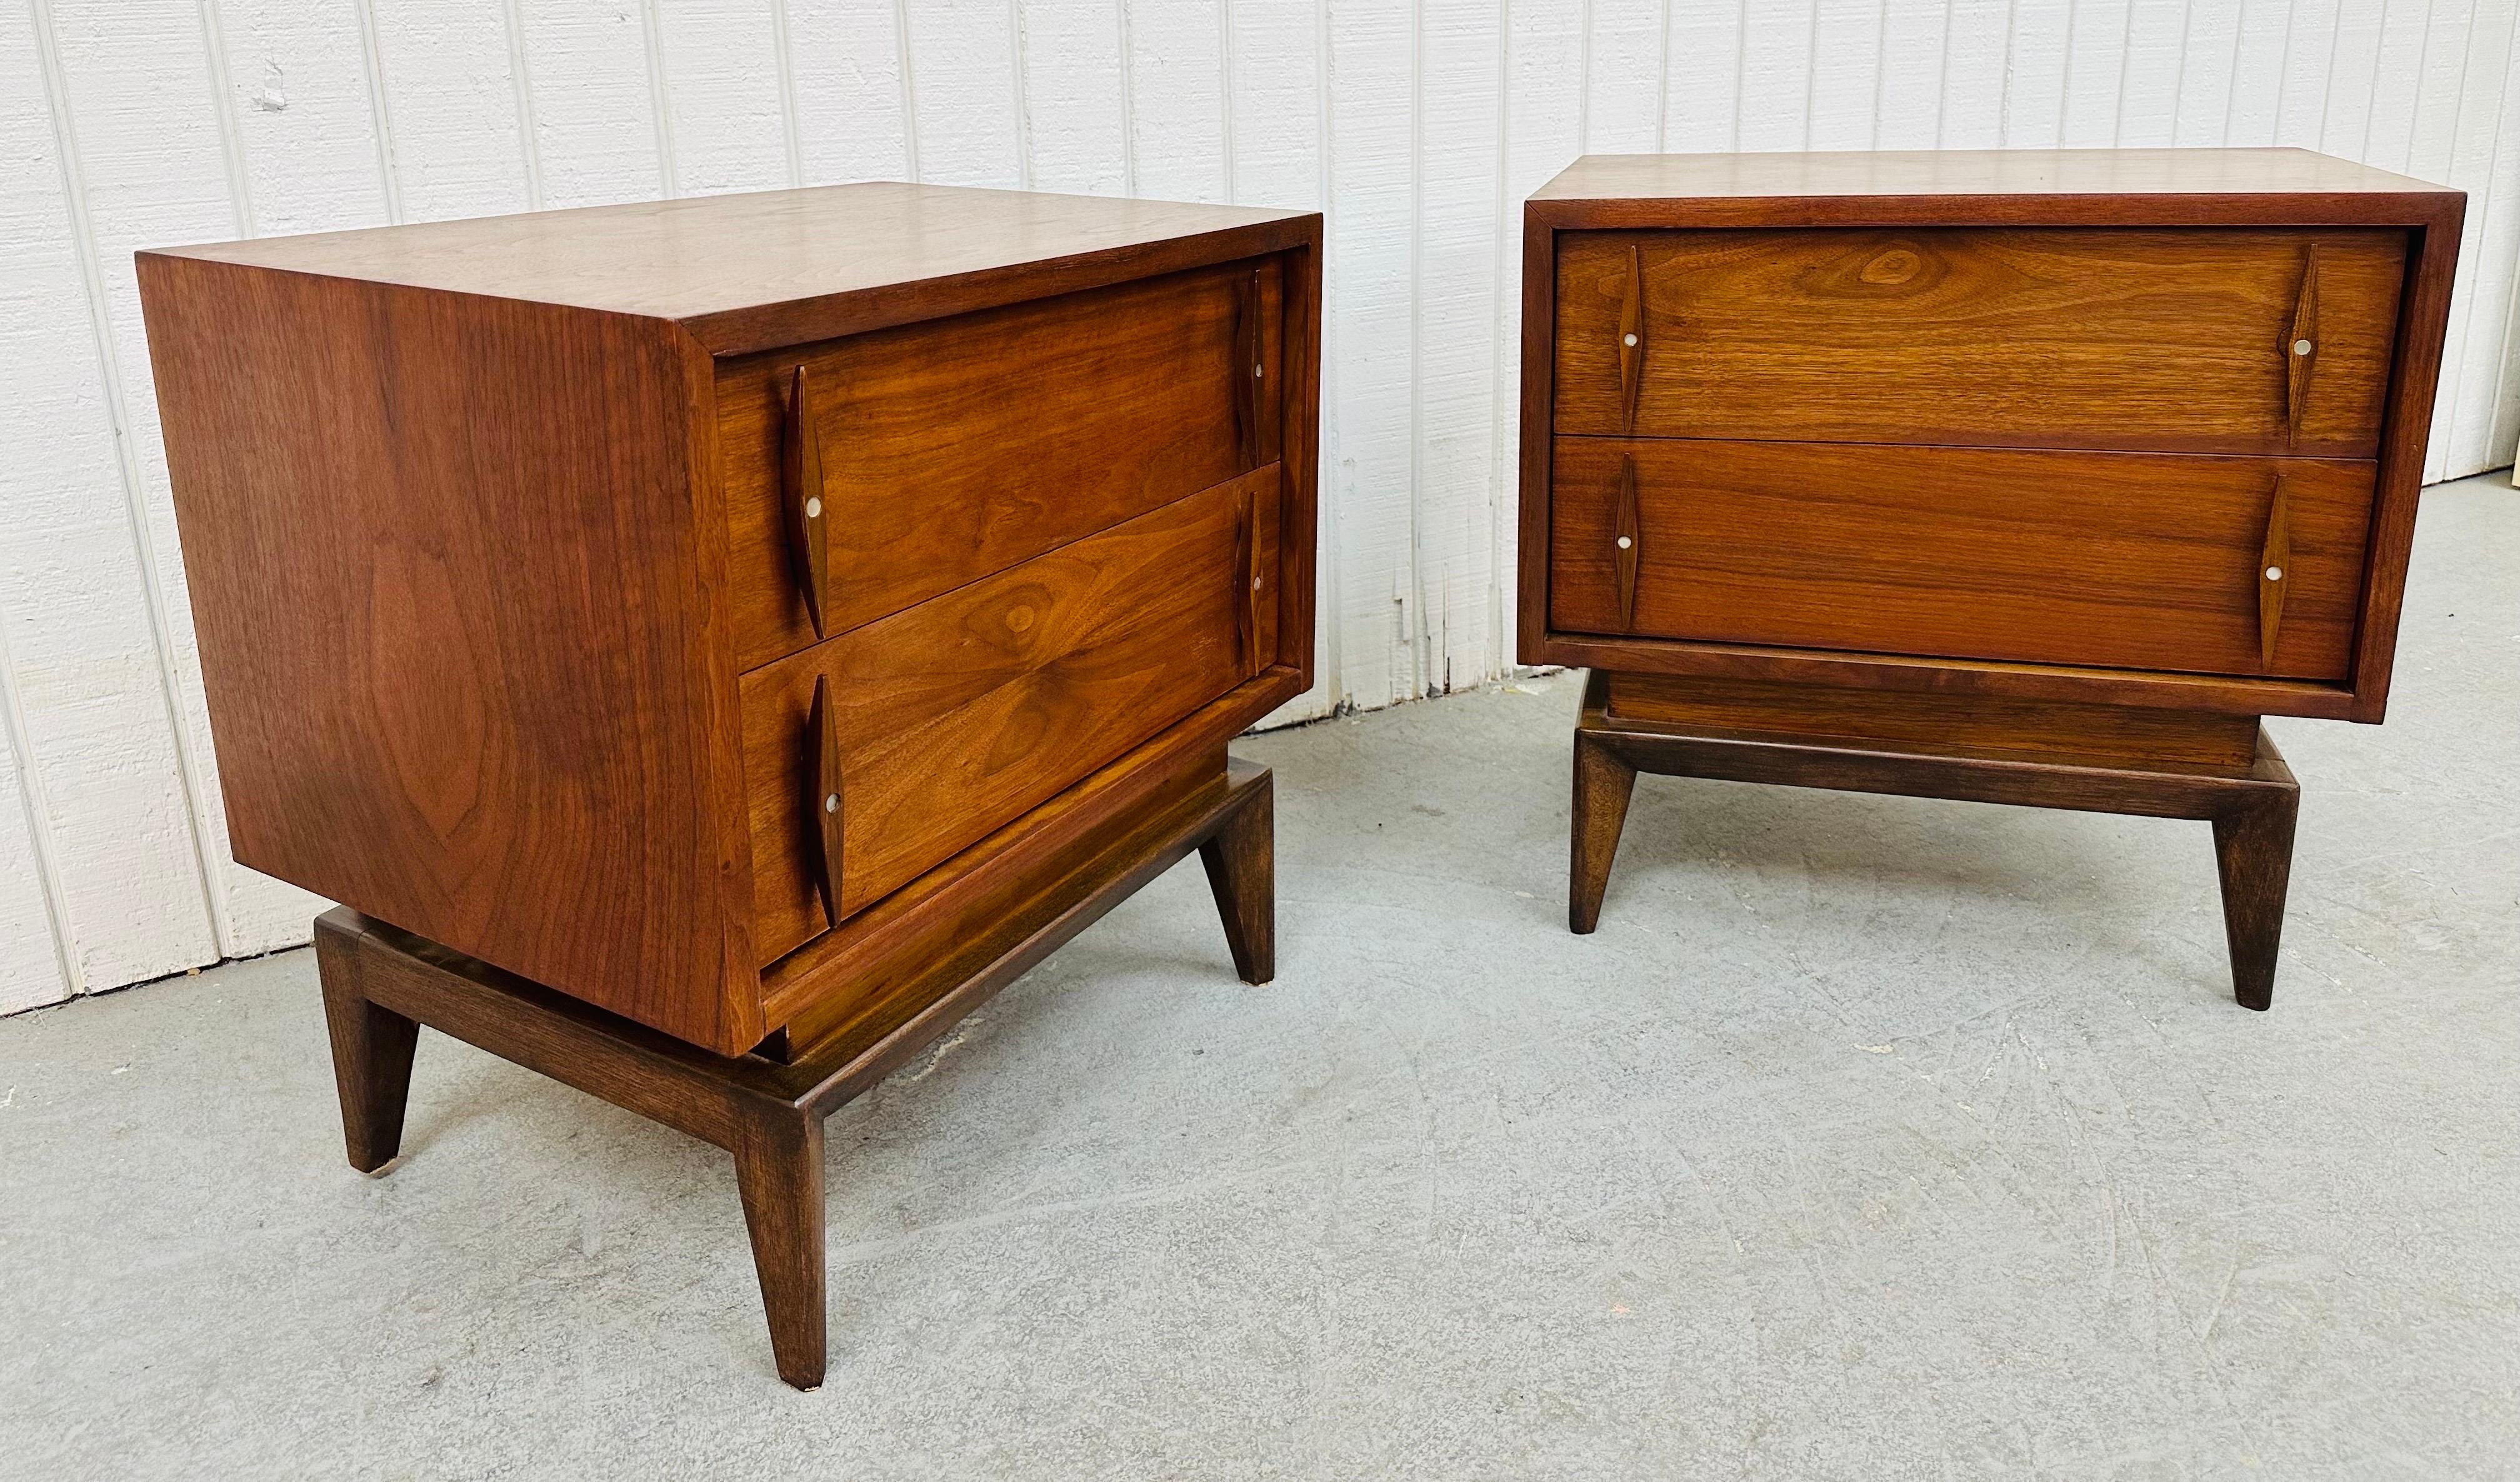 This listing is for a pair of Mid-Century Modern American Of Martinsville Walnut Nightstands. Featuring a straight line design, two drawers for storage, modern legs, Albert Pravin style sculpted pulls, and a beautiful walnut finish. This is an